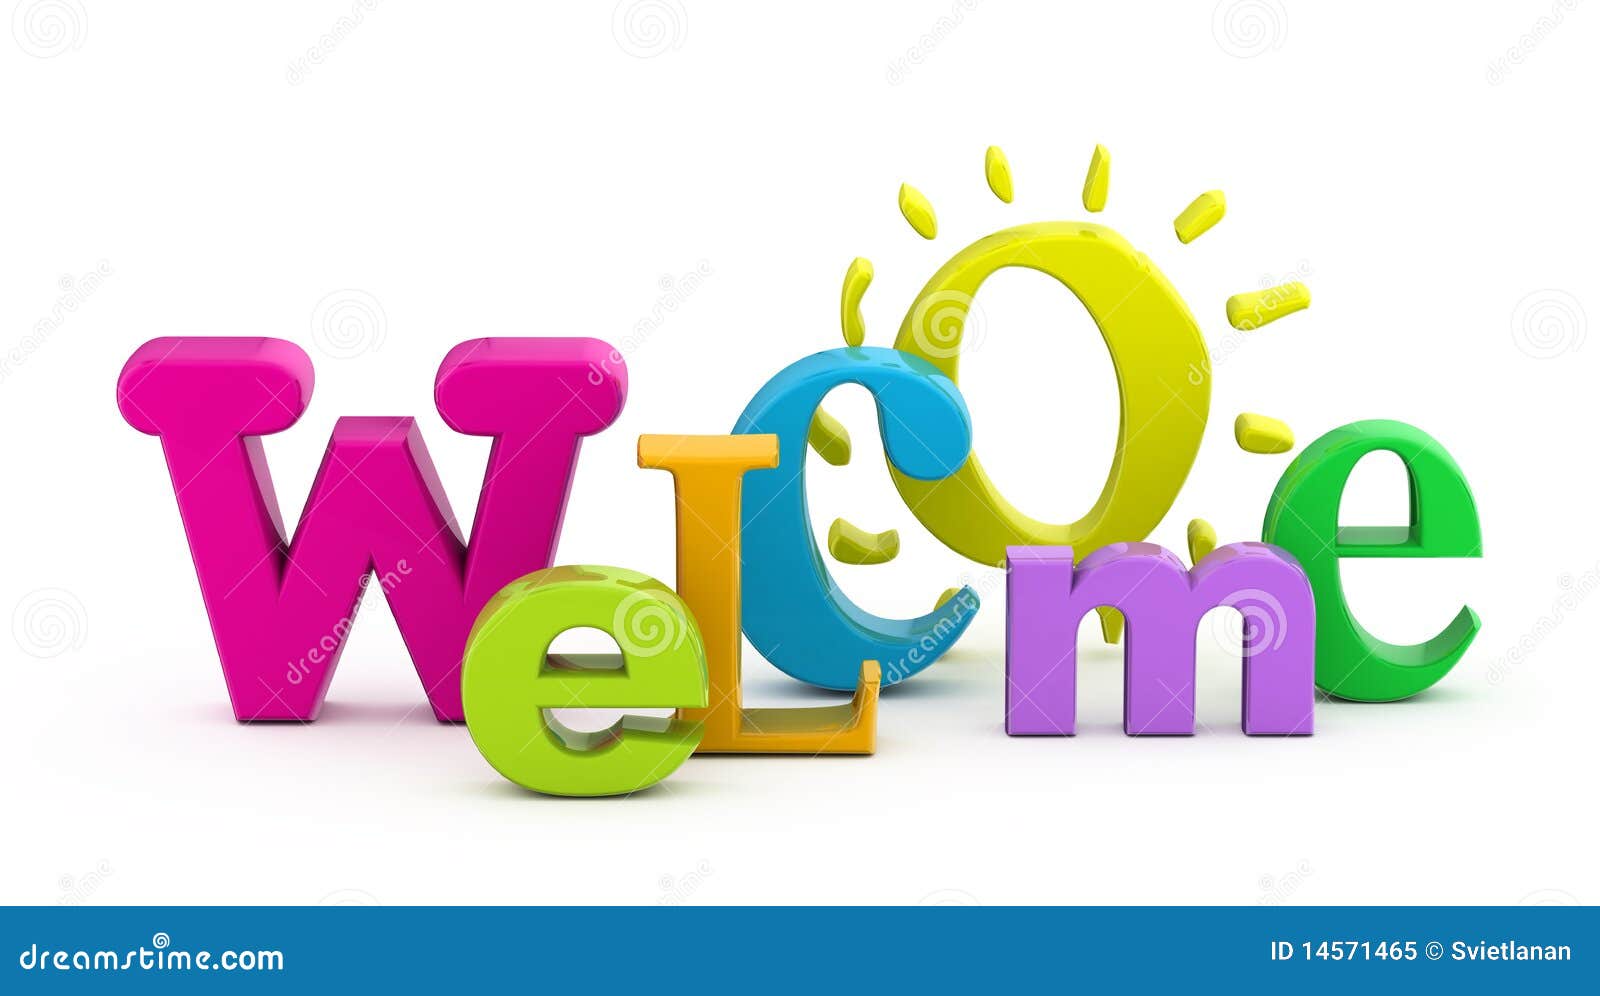 Welcome Stock Illustrations 184 549 Welcome Stock Illustrations Vectors Clipart Dreamstime